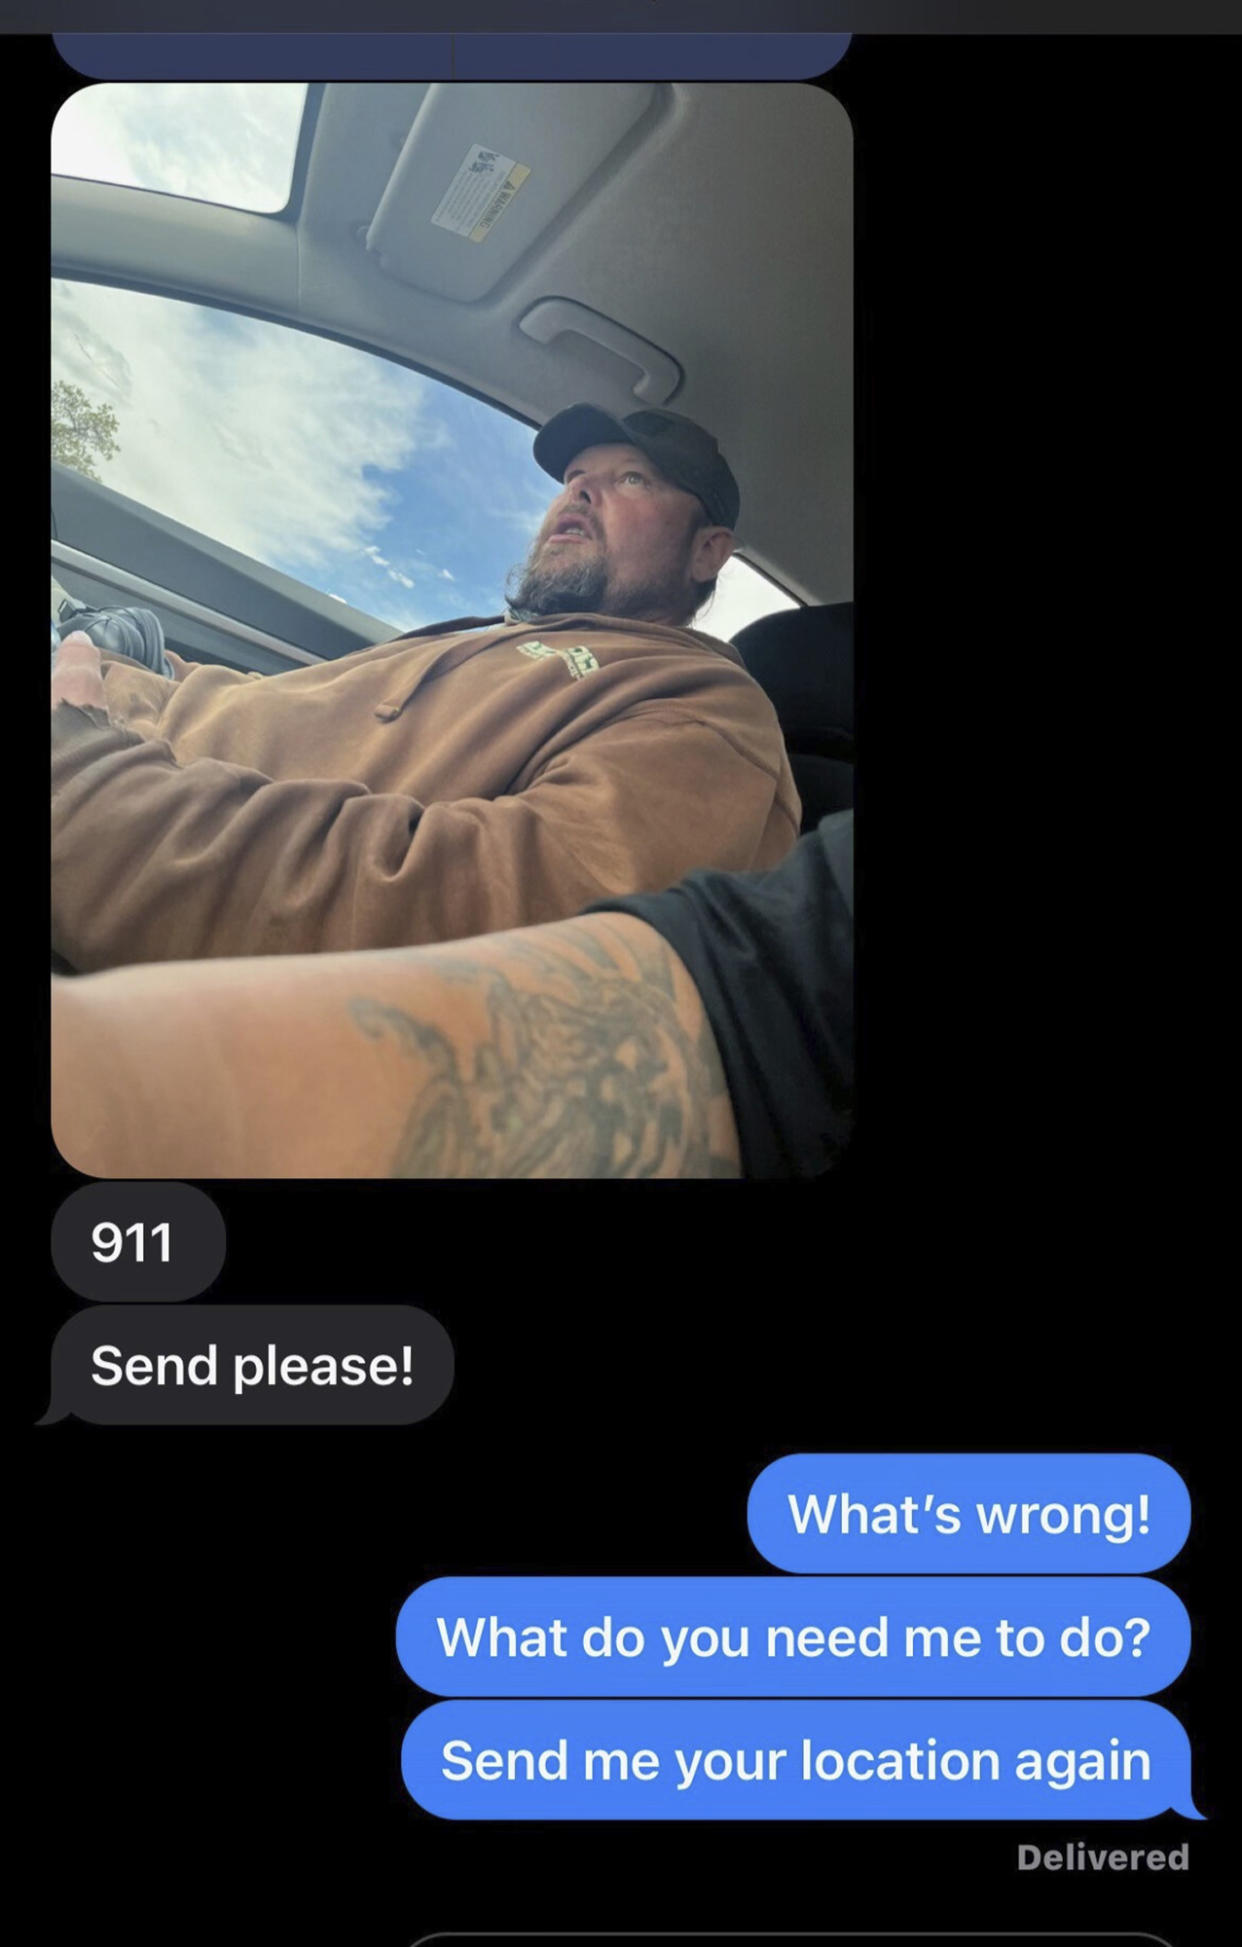 A text message exchange shows a photo taken by Qualin Campbell of a man in the passenger seat. Qualin Campbell’s texts read: 911 and Send please! His wife’s texts read: What’s wrong! What do you need me to do? Send me your location again.